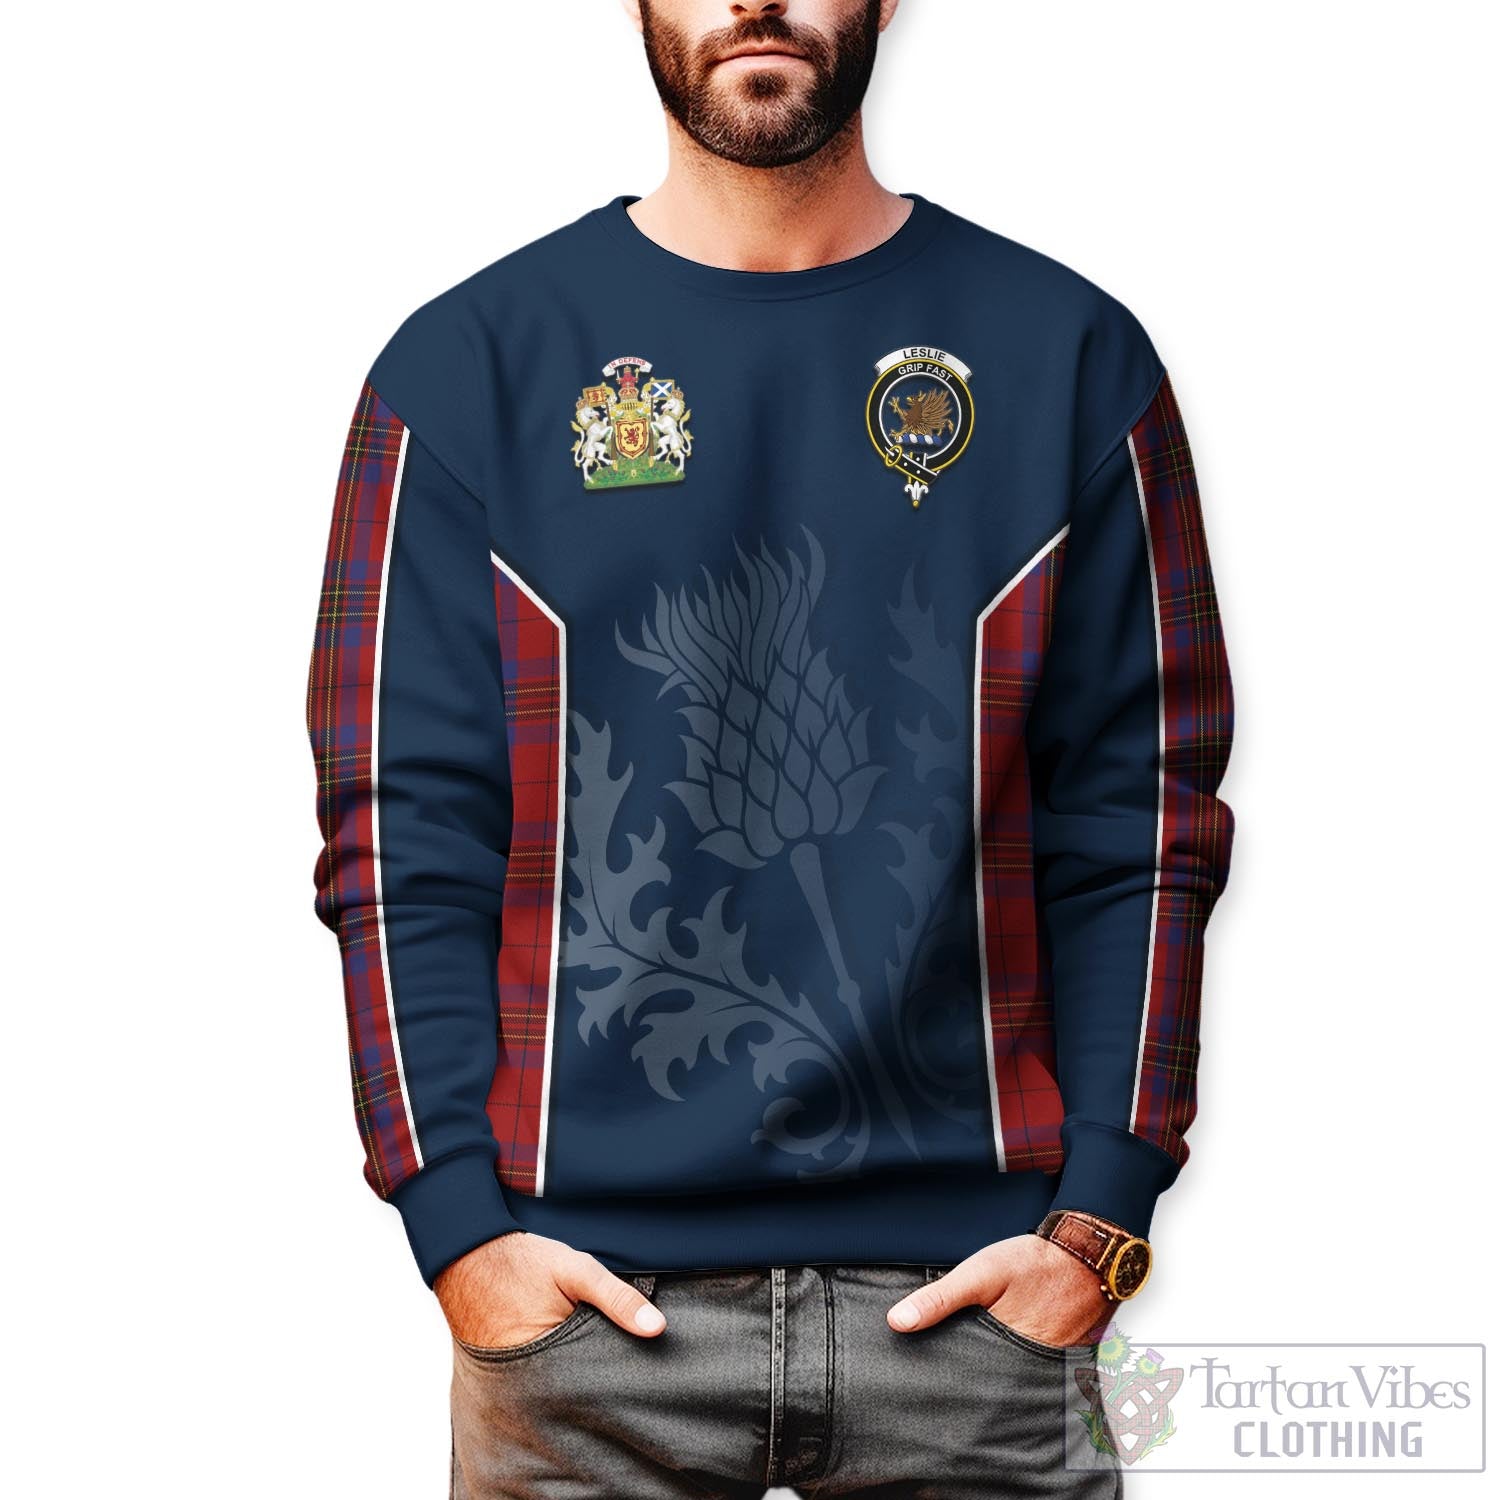 Tartan Vibes Clothing Leslie Red Tartan Sweatshirt with Family Crest and Scottish Thistle Vibes Sport Style